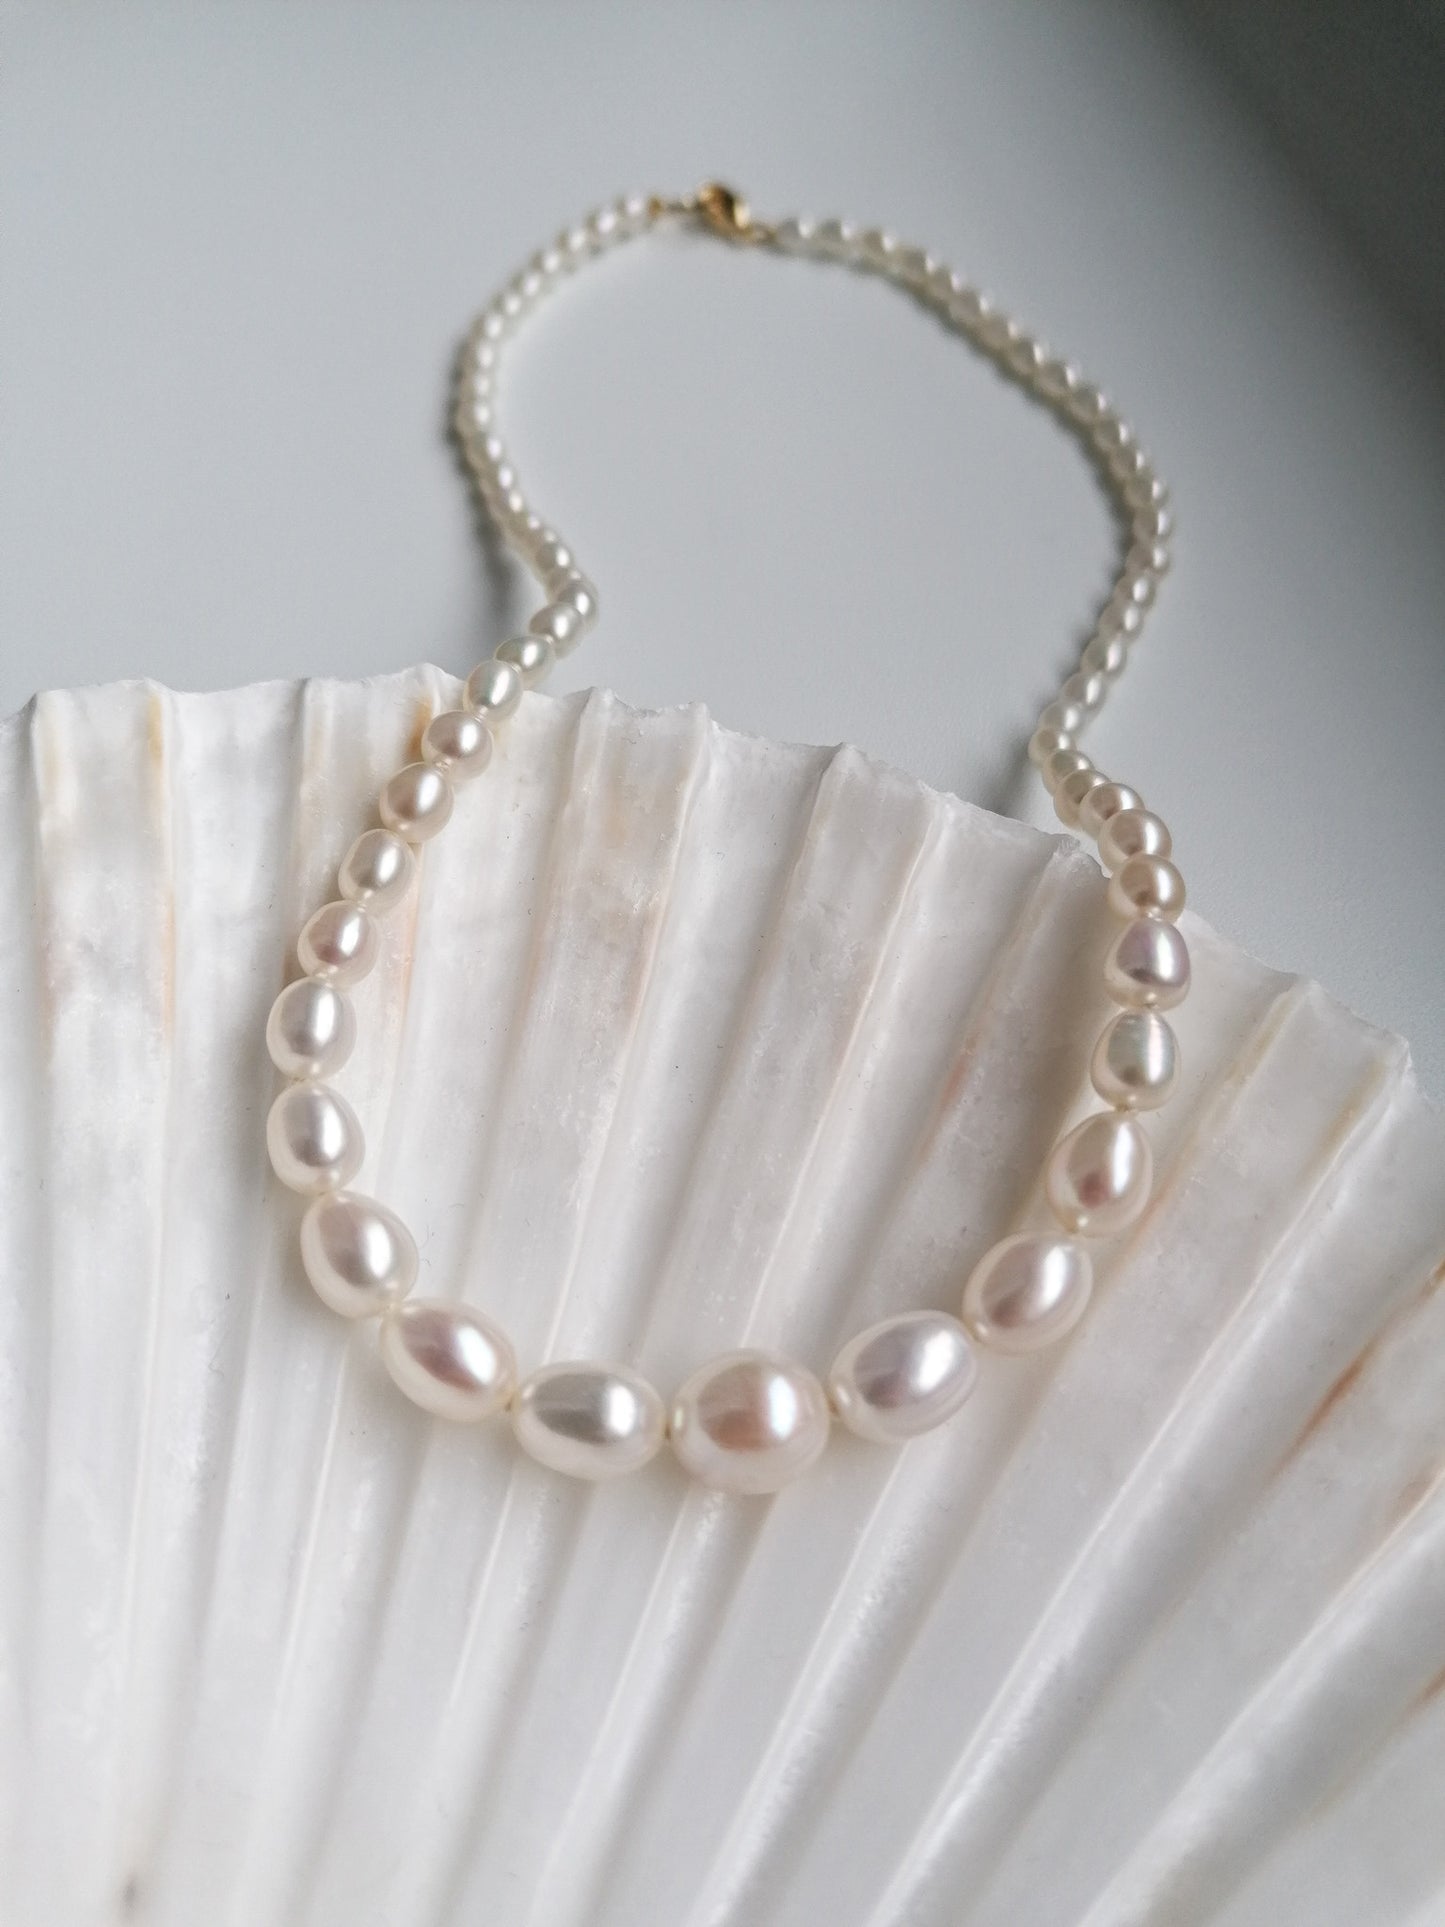 Graduated pearl nekclace - gold filled